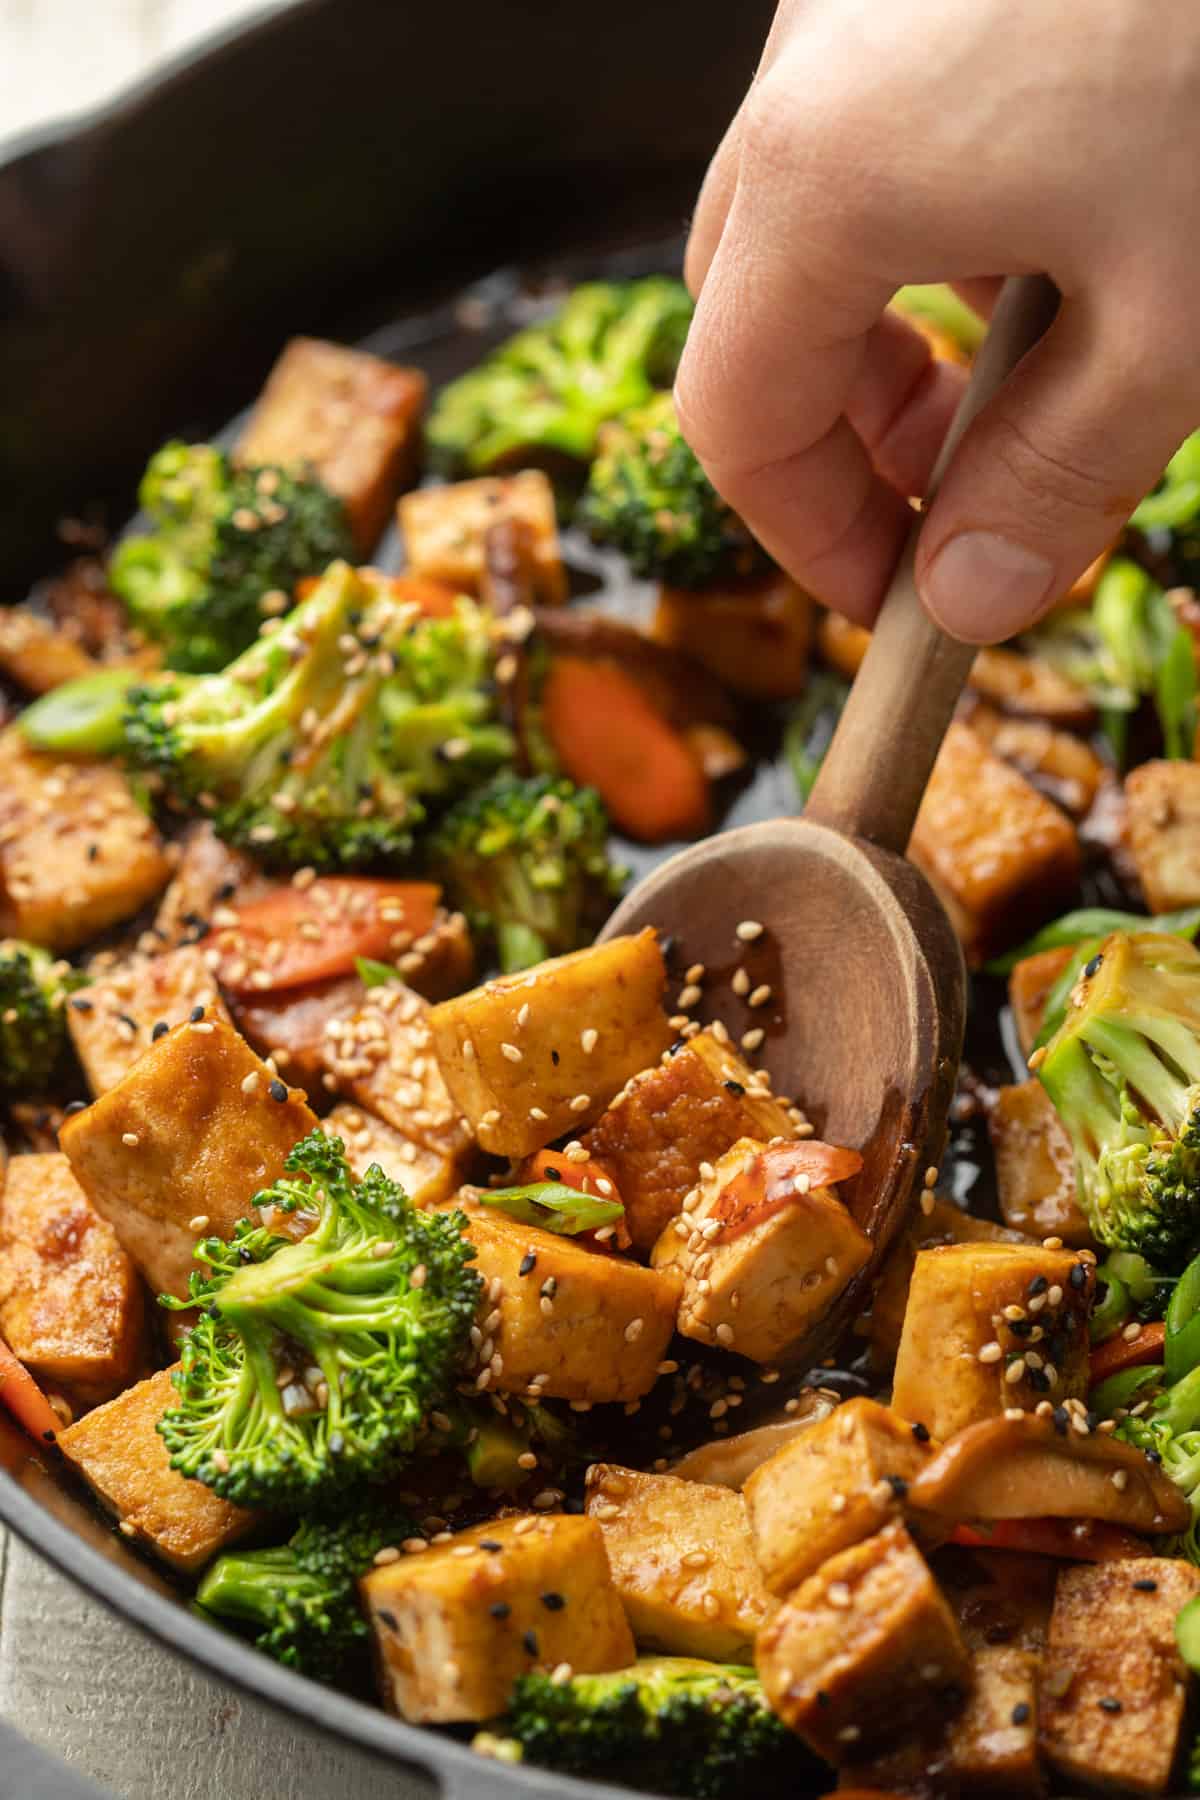 Close up of a hand using a wooden spoon to scoop Tofu Stir-Fry from a skillet.